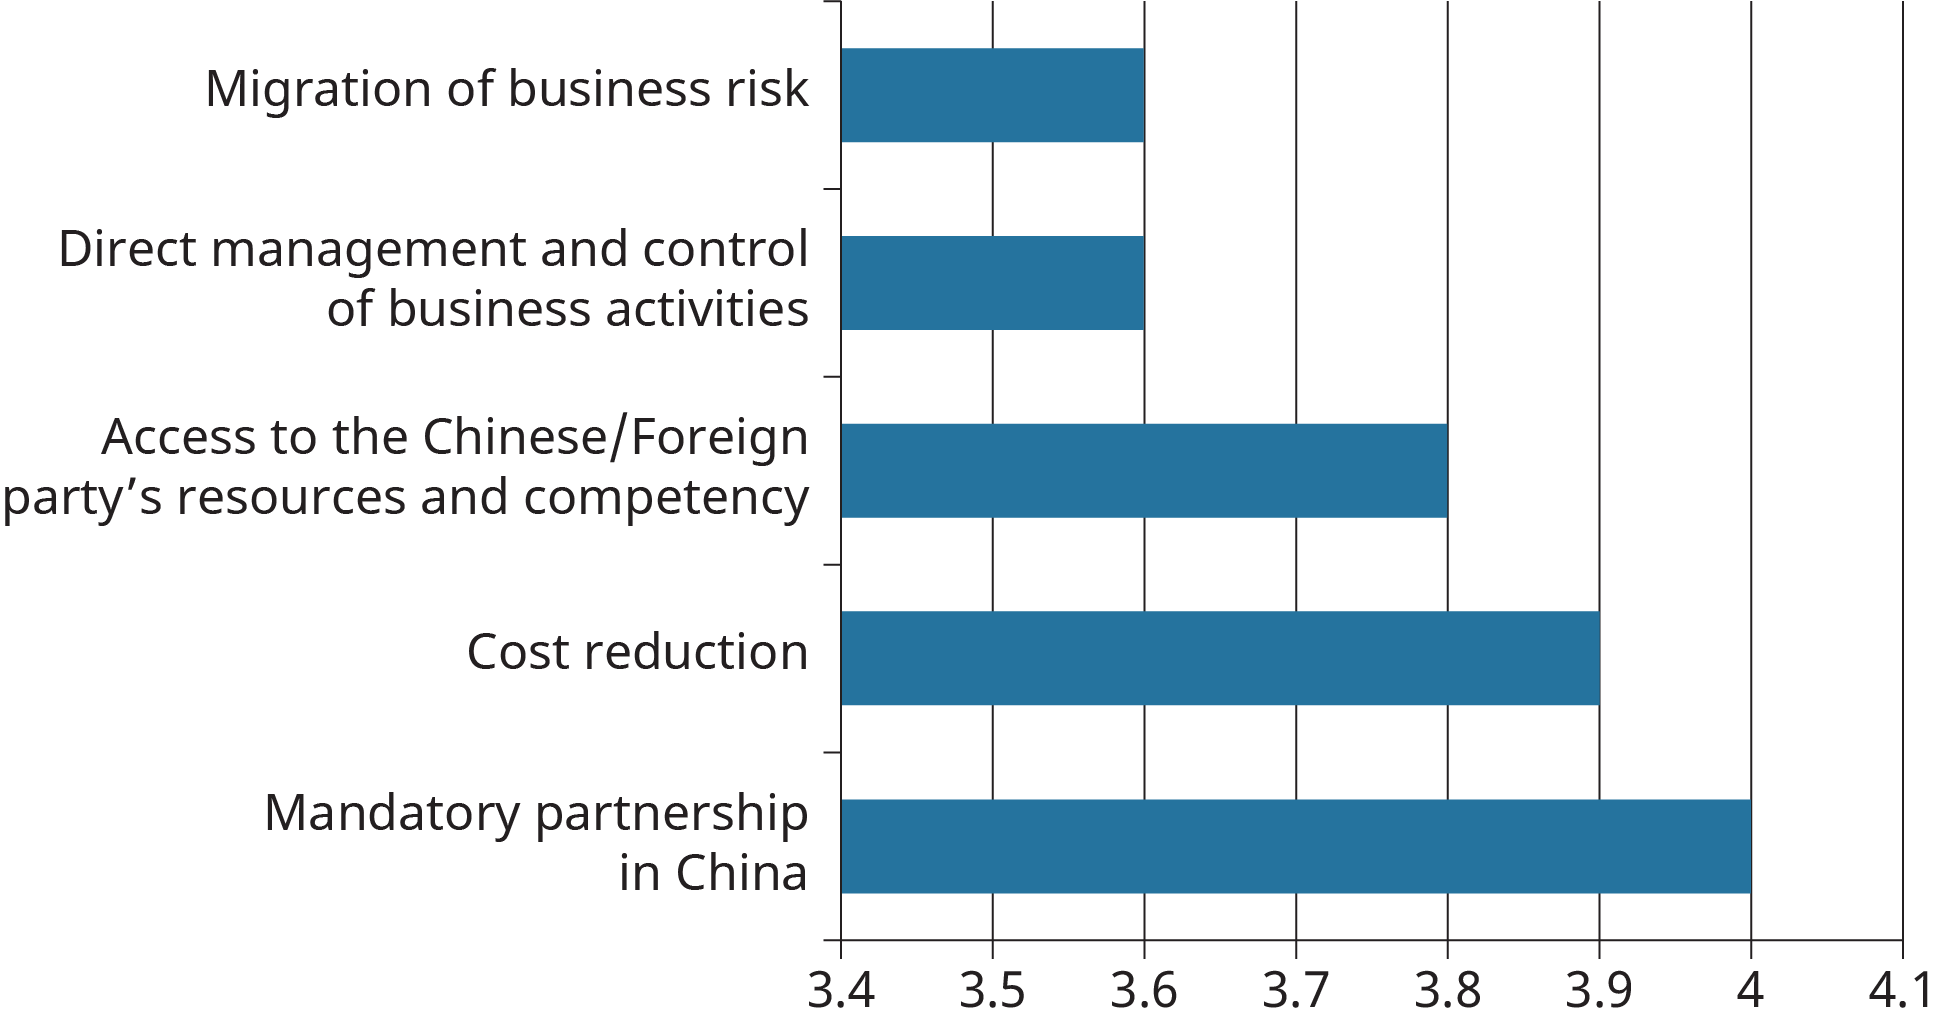 A bar graph shows the main benefits foreign companies expect to gain from strategic alliances.